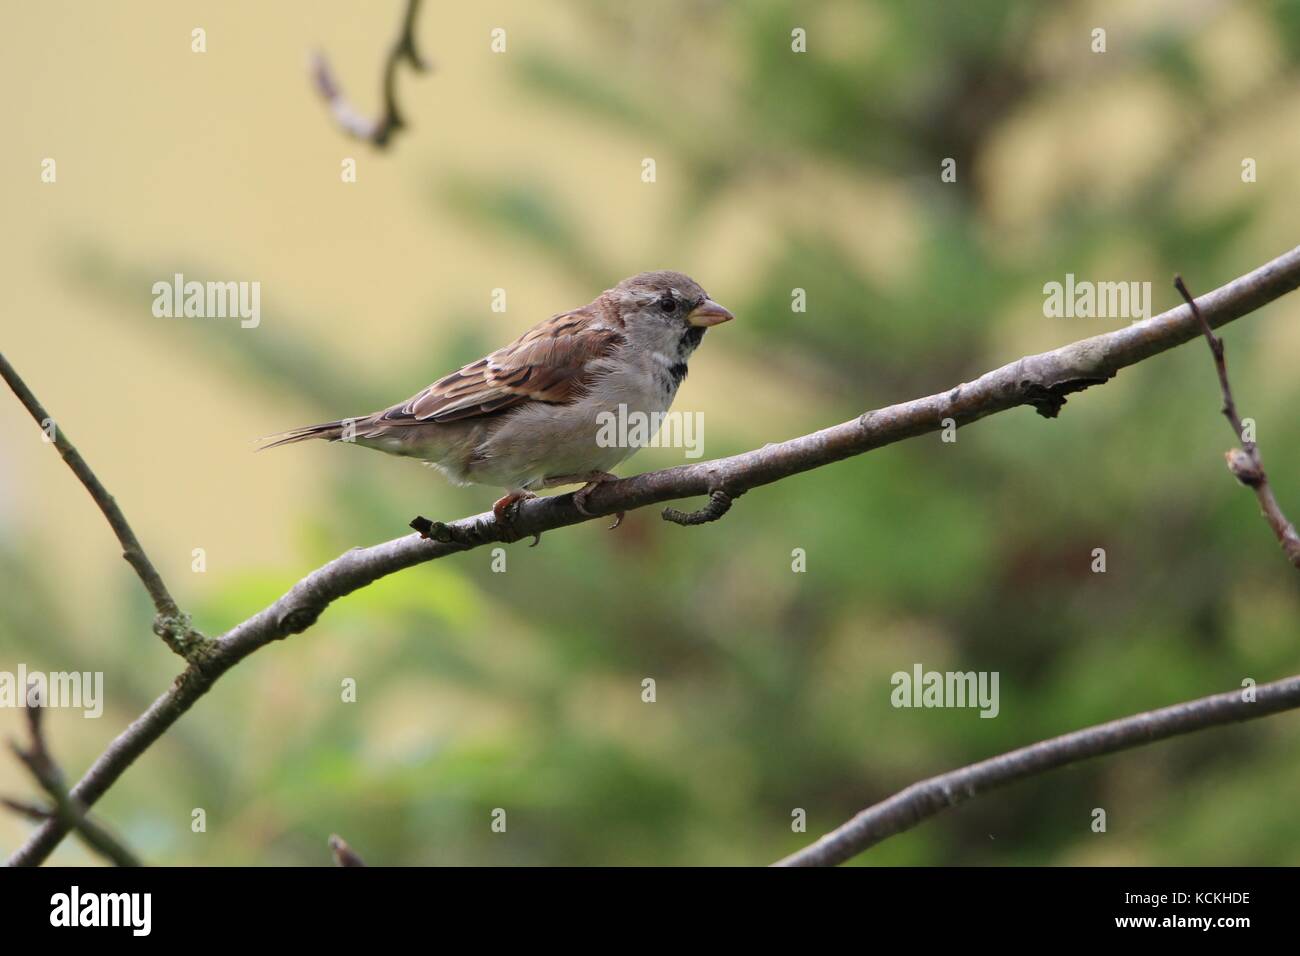 A sparrow sits on a  branch Stock Photo